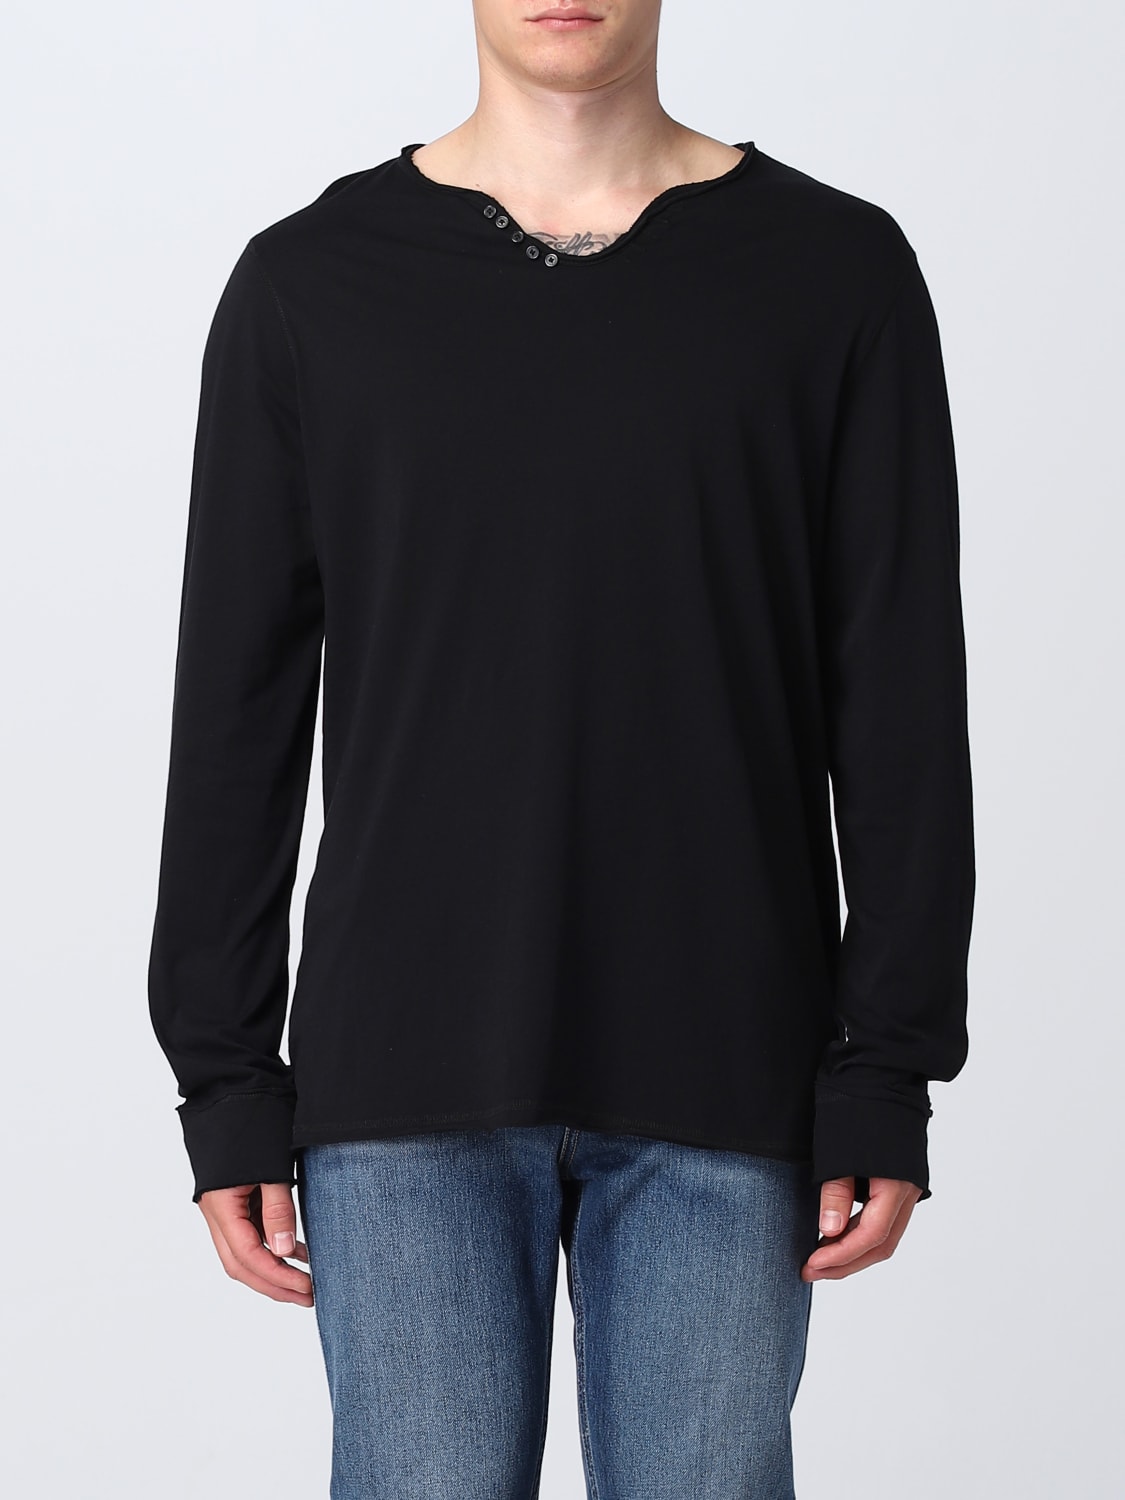 ZADIG & VOLTAIRE: t-shirt for man - Black | Zadig & Voltaire t-shirt ...